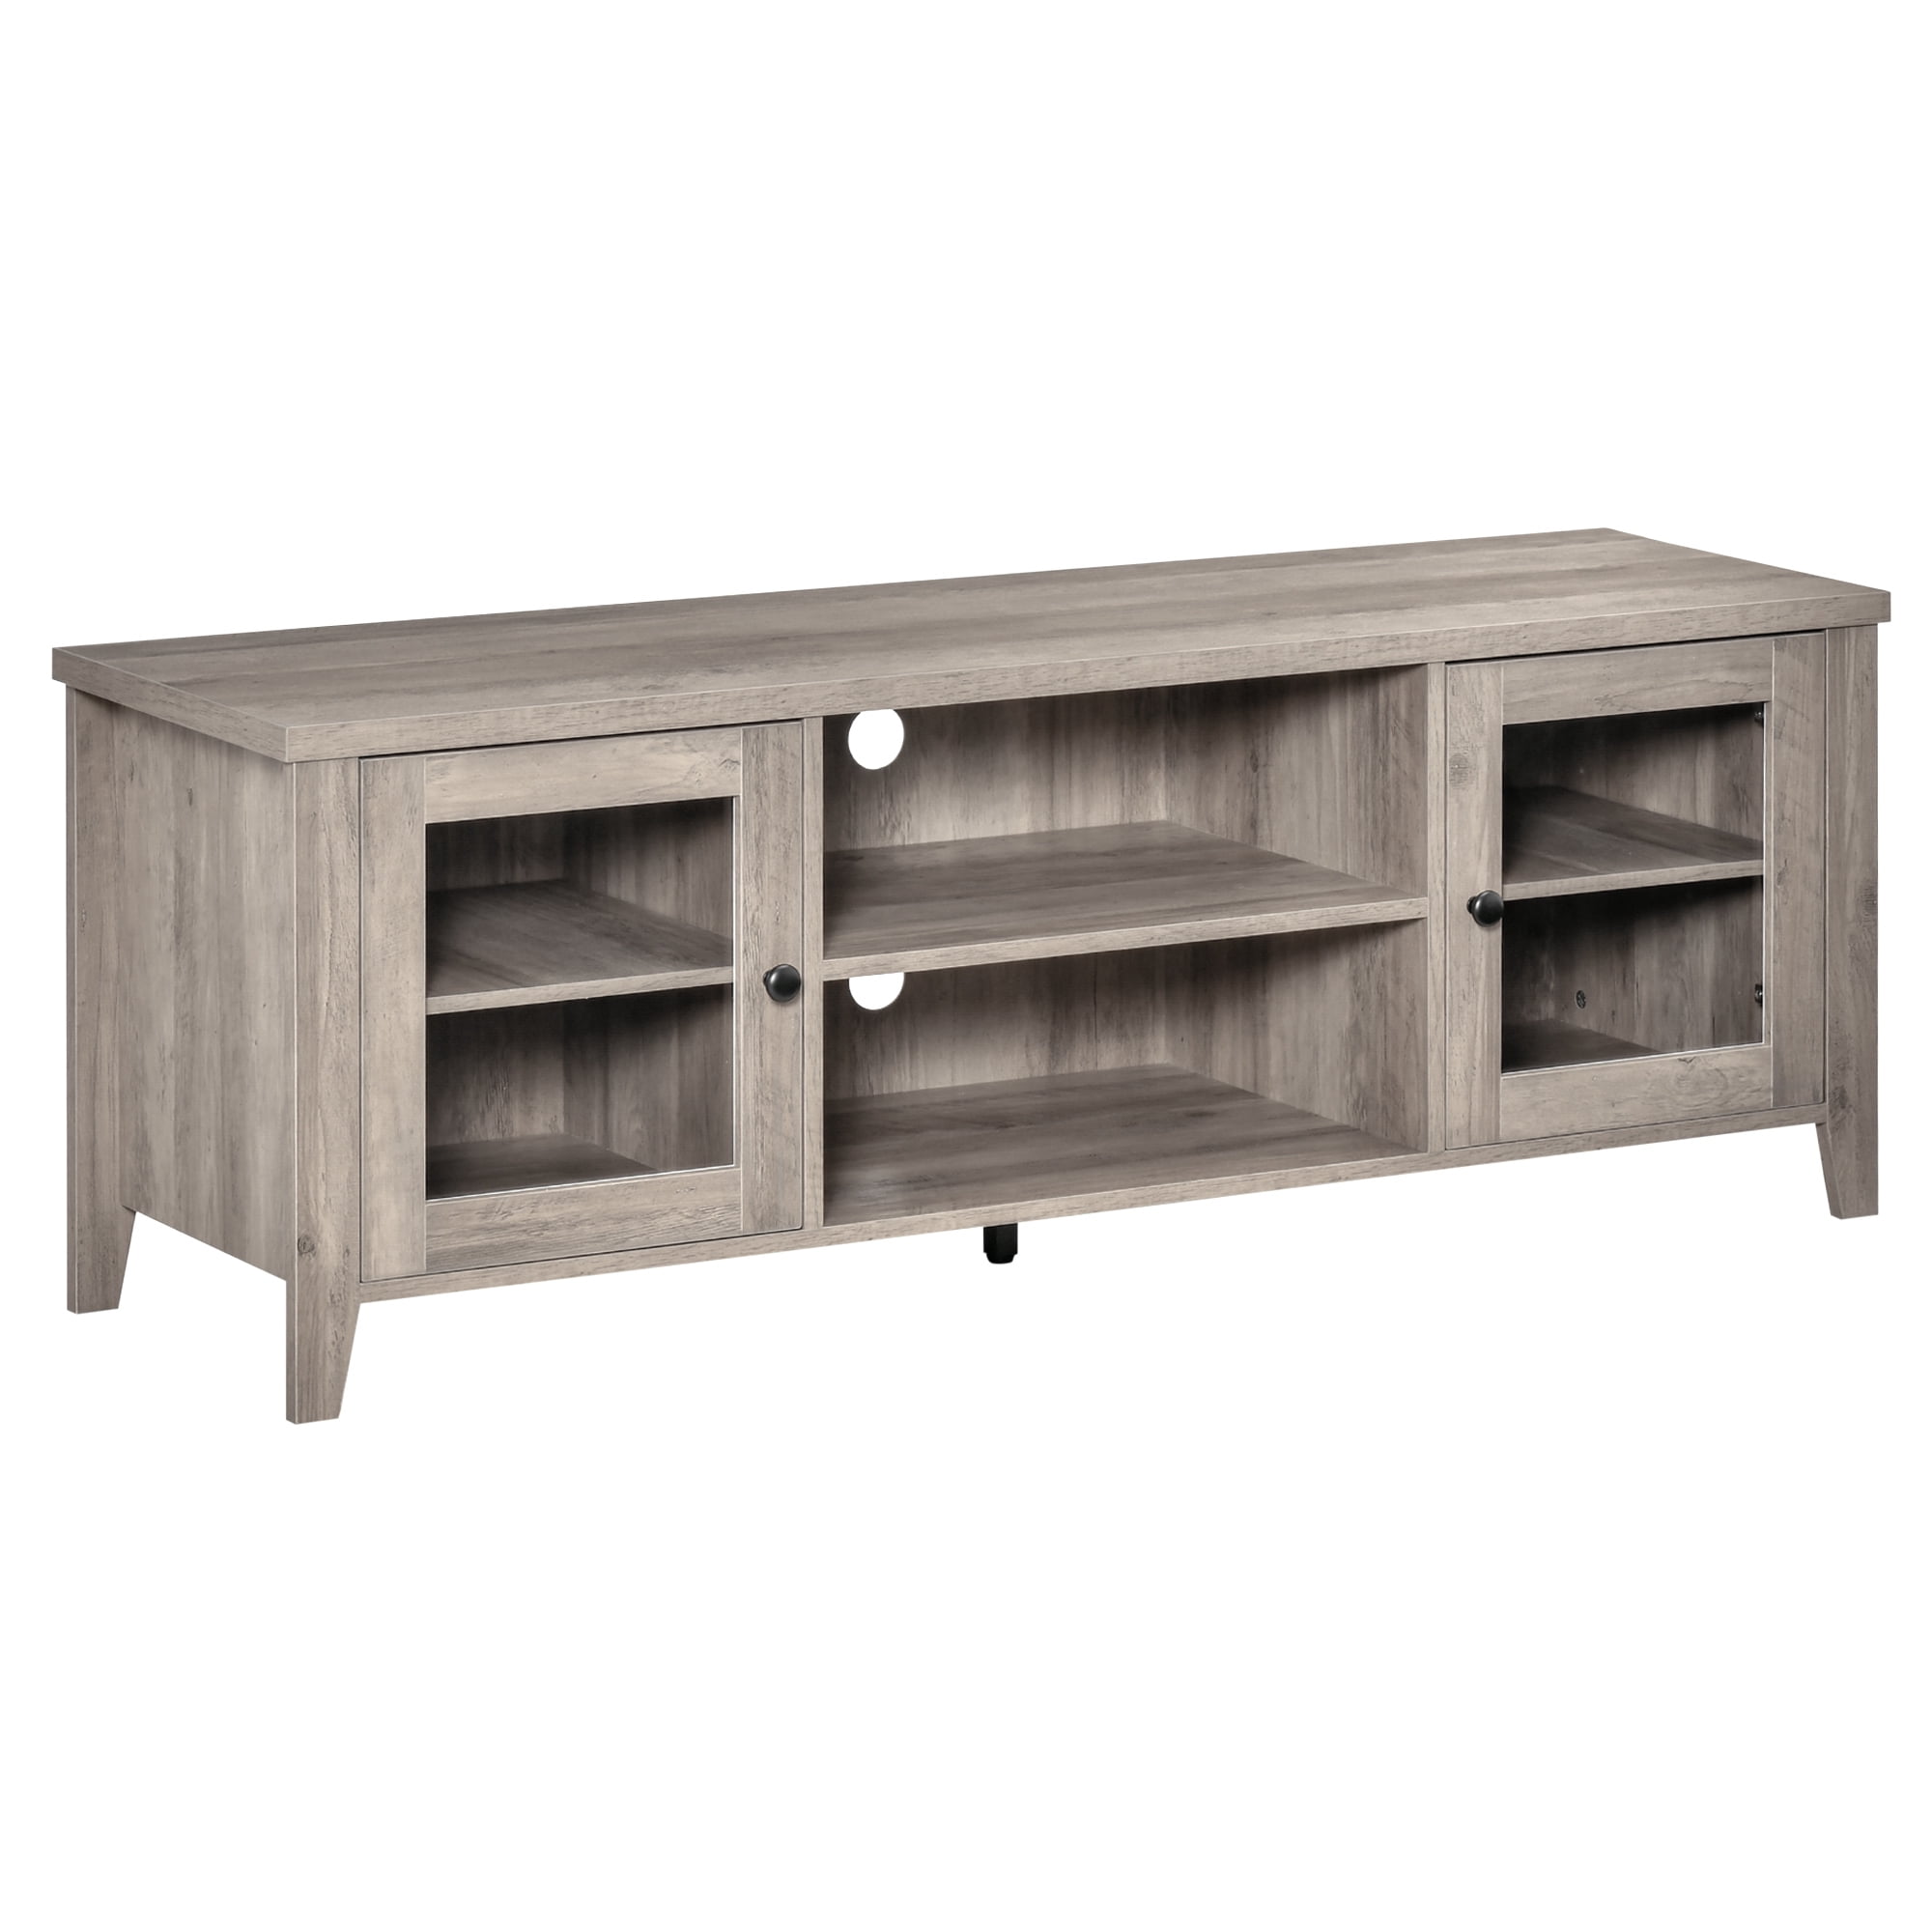 HOMCOM Modern TV Stand, Entertainment Center with Shelves and Cabinets ...